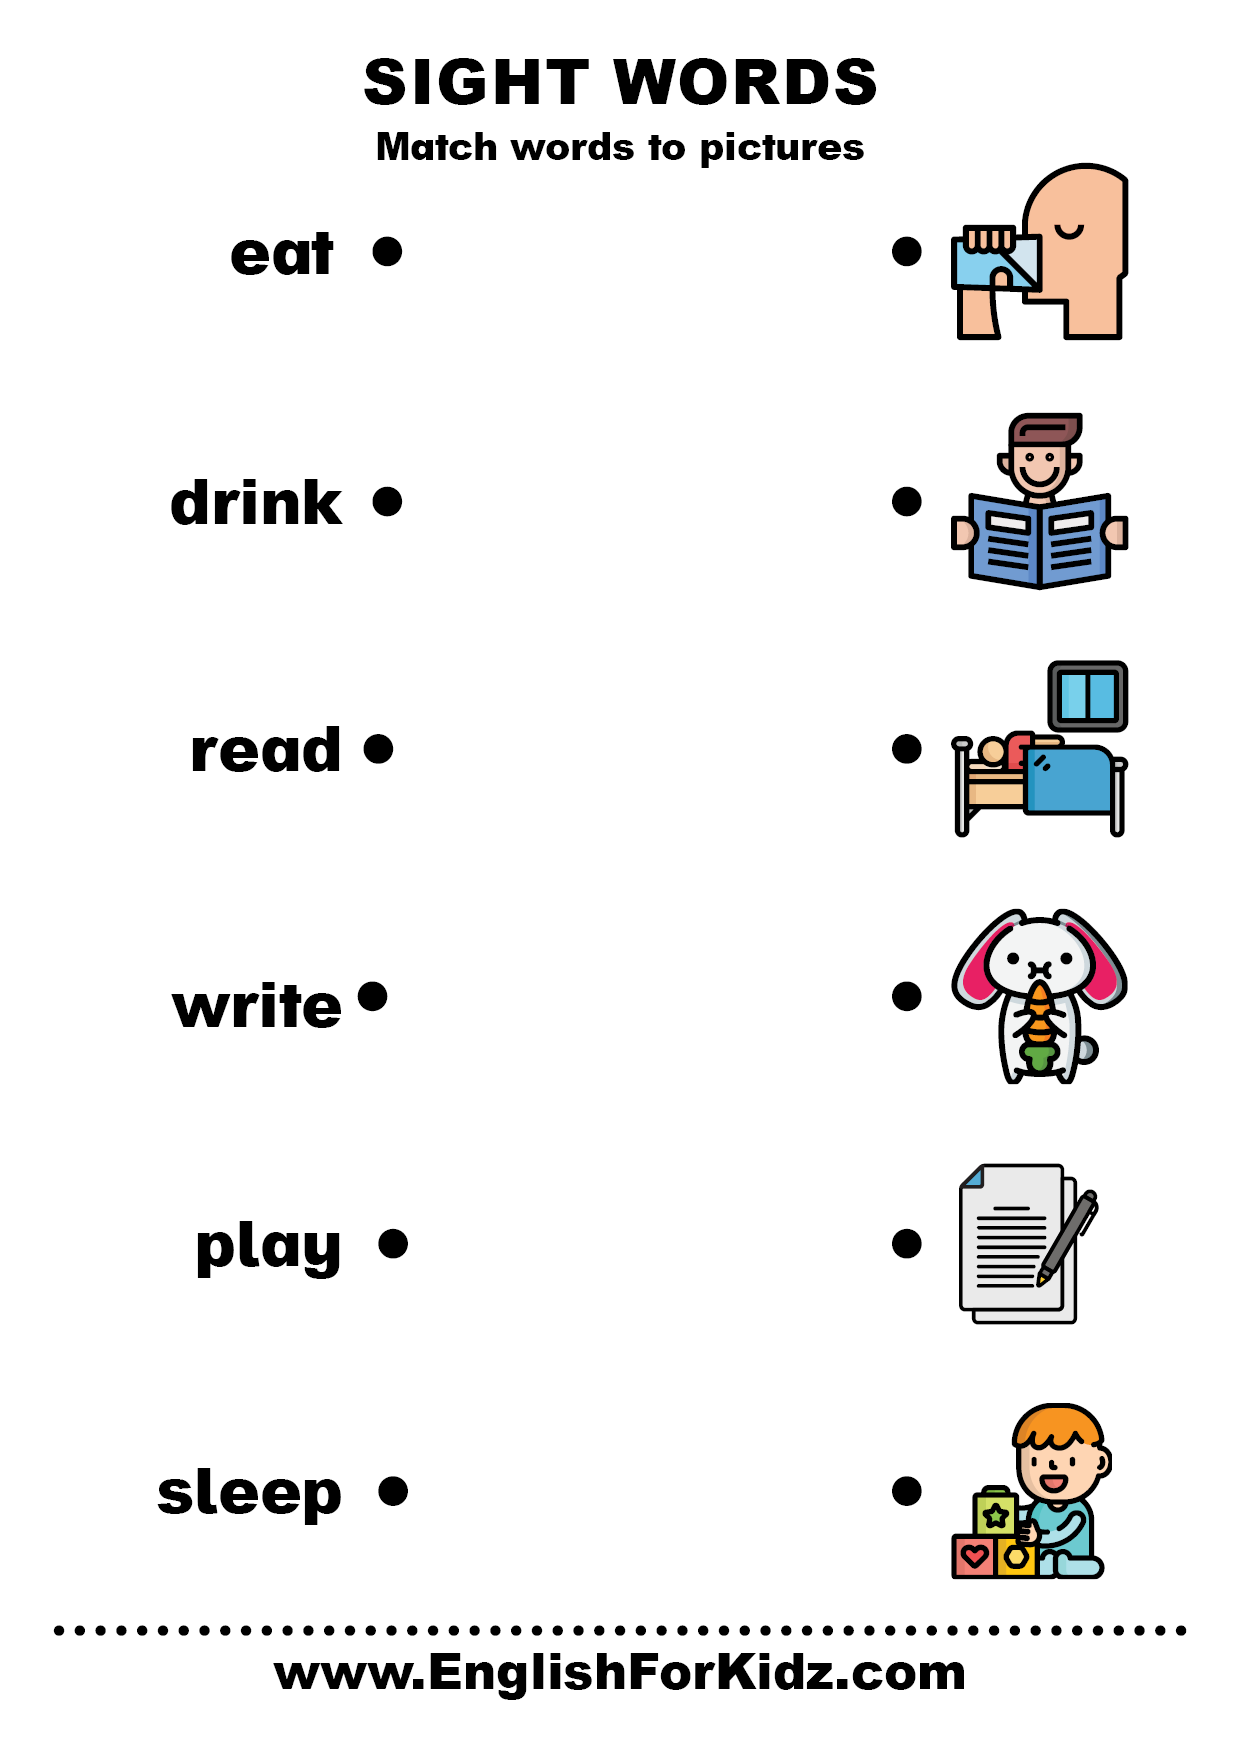 English for Kids Step by Step: Sight Words Worksheets